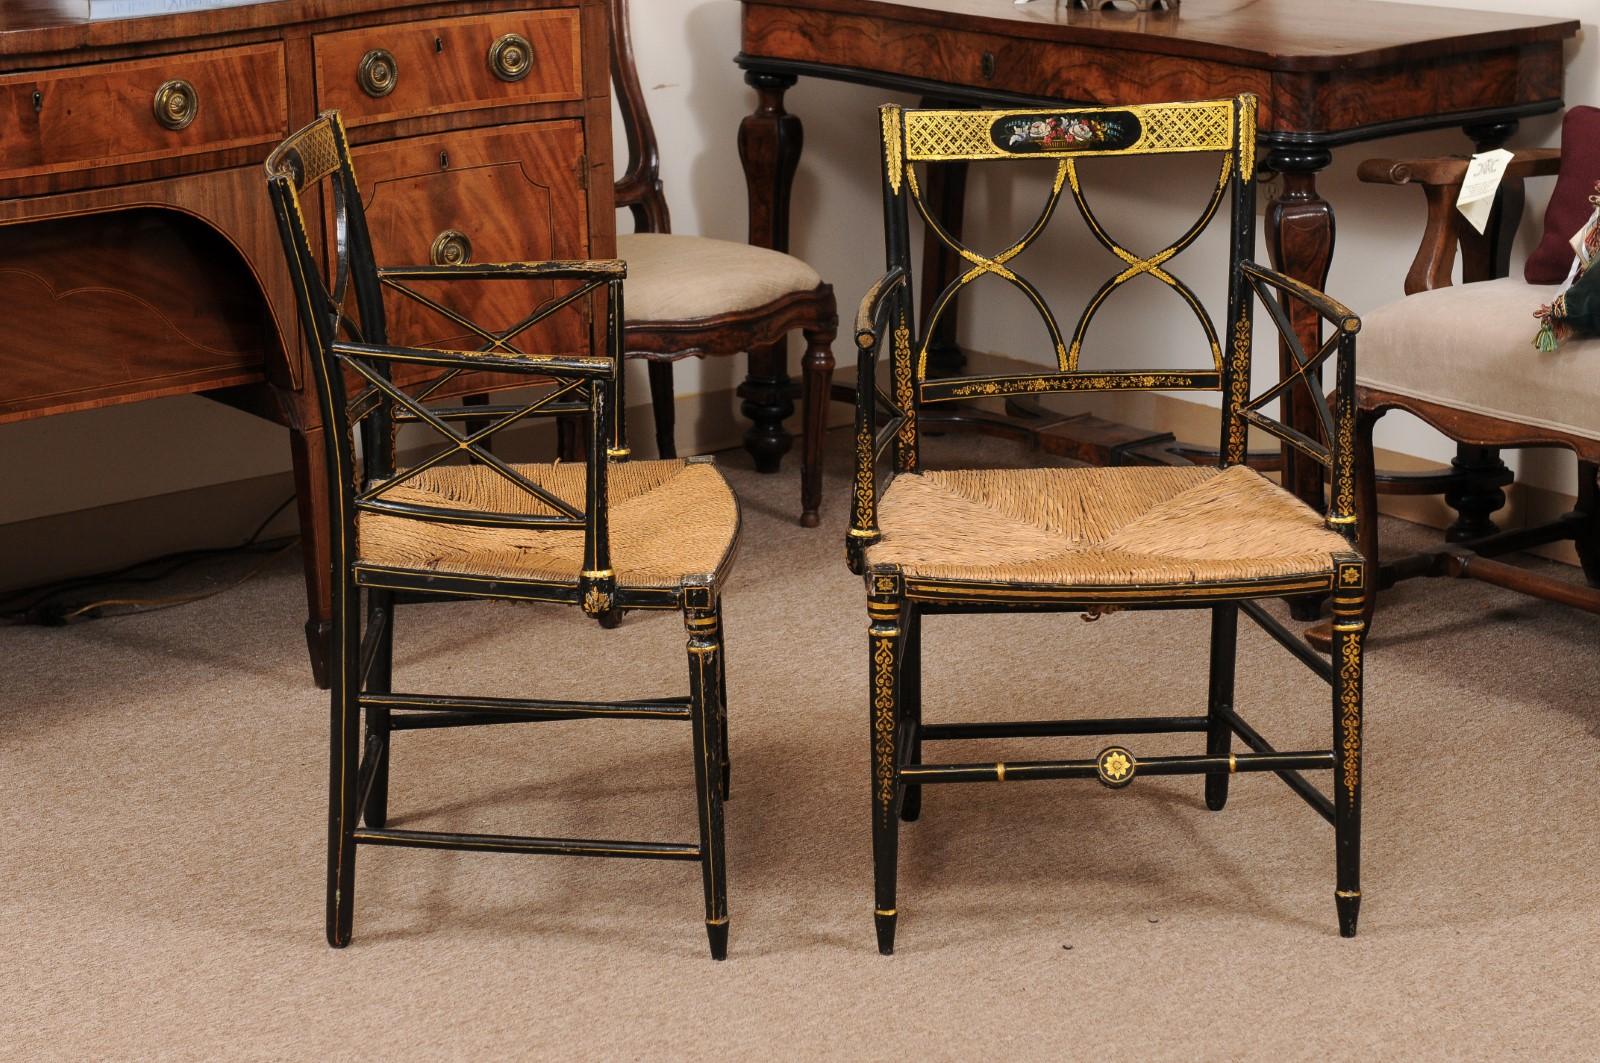  Pair of Regency Black Painted Arm Chairs with Floral Decoration & Rush Seats In Good Condition For Sale In Atlanta, GA